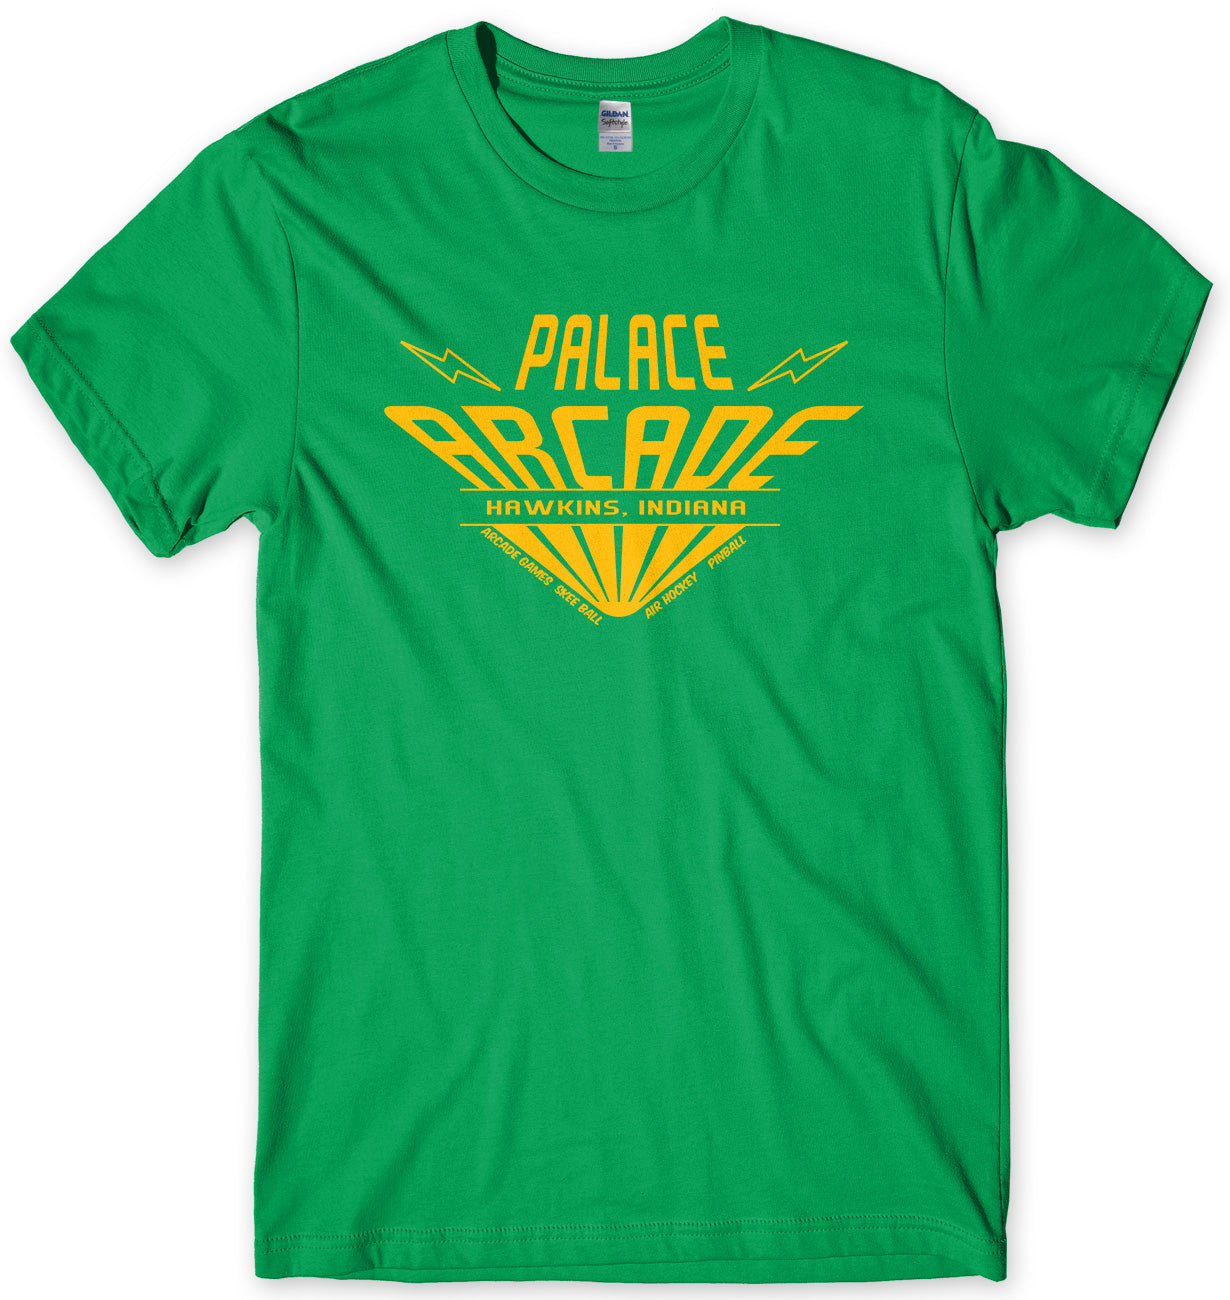 PALACE ARCADE - INSPIRED BY STRANGER THINGS MENS UNISEX T-SHIRT